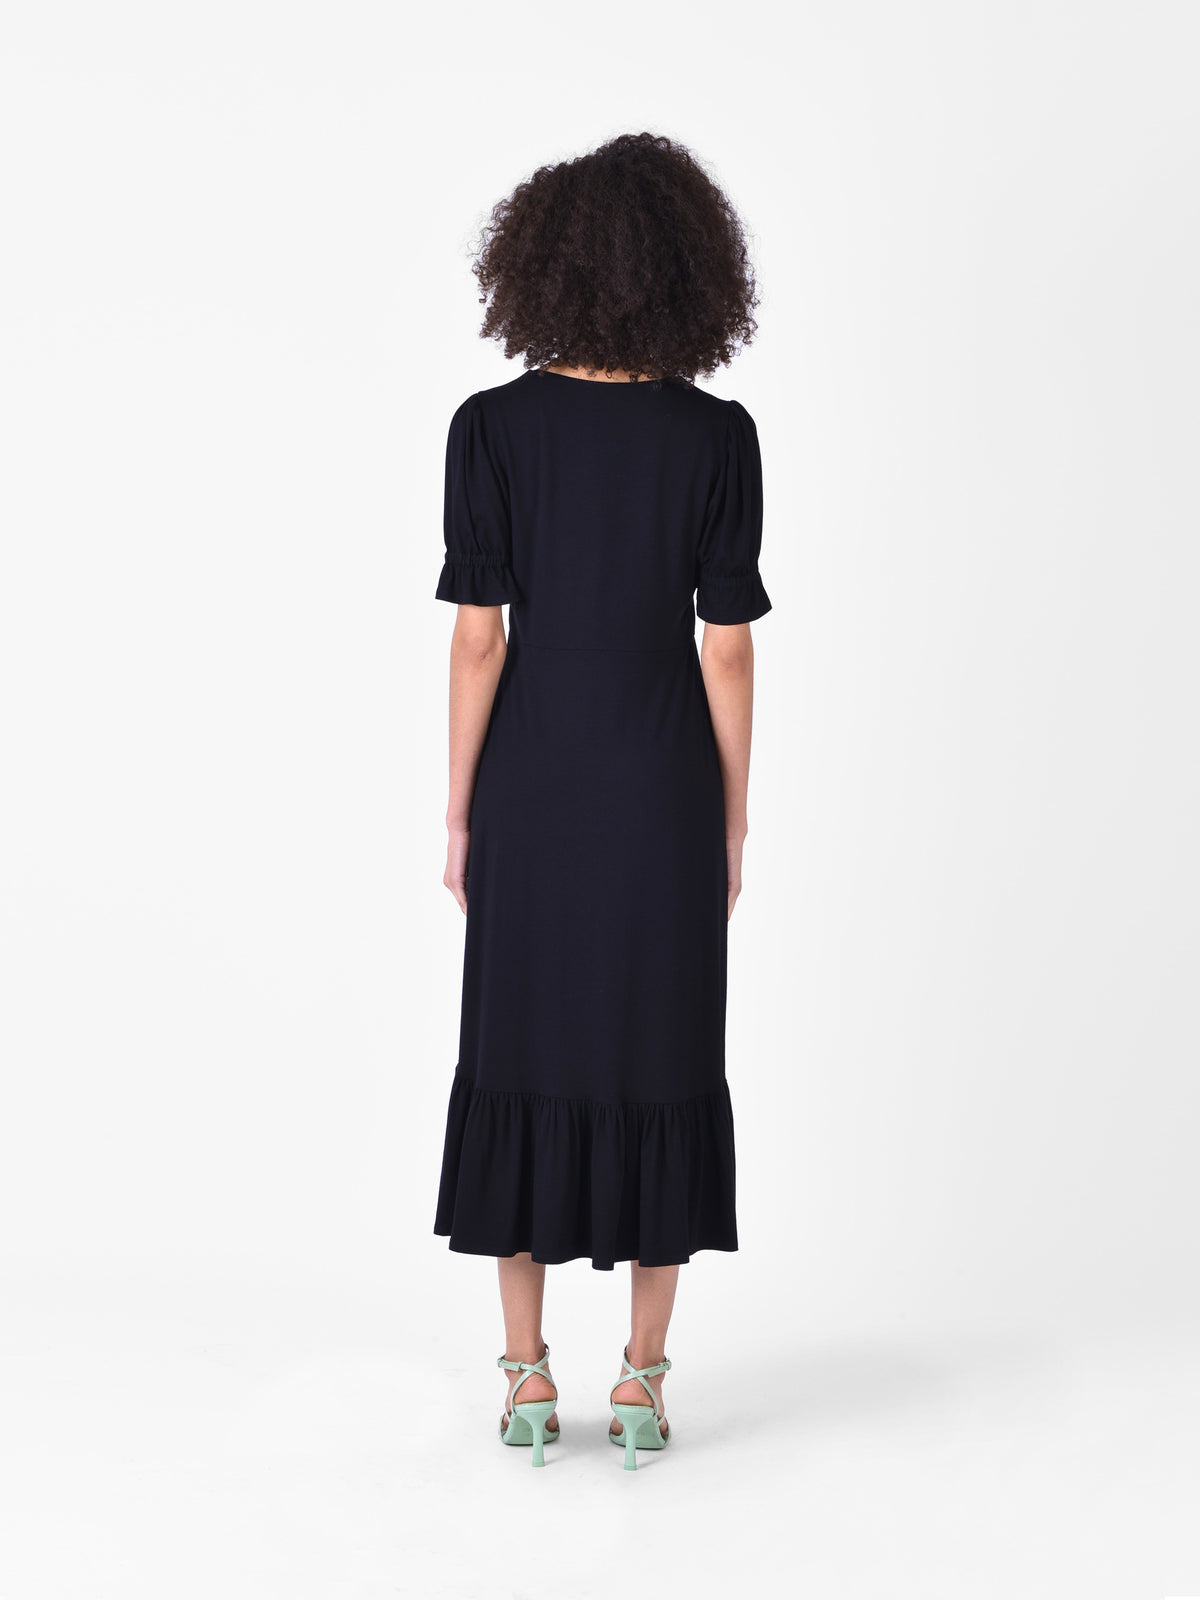 Black Ruched Jersey Dress